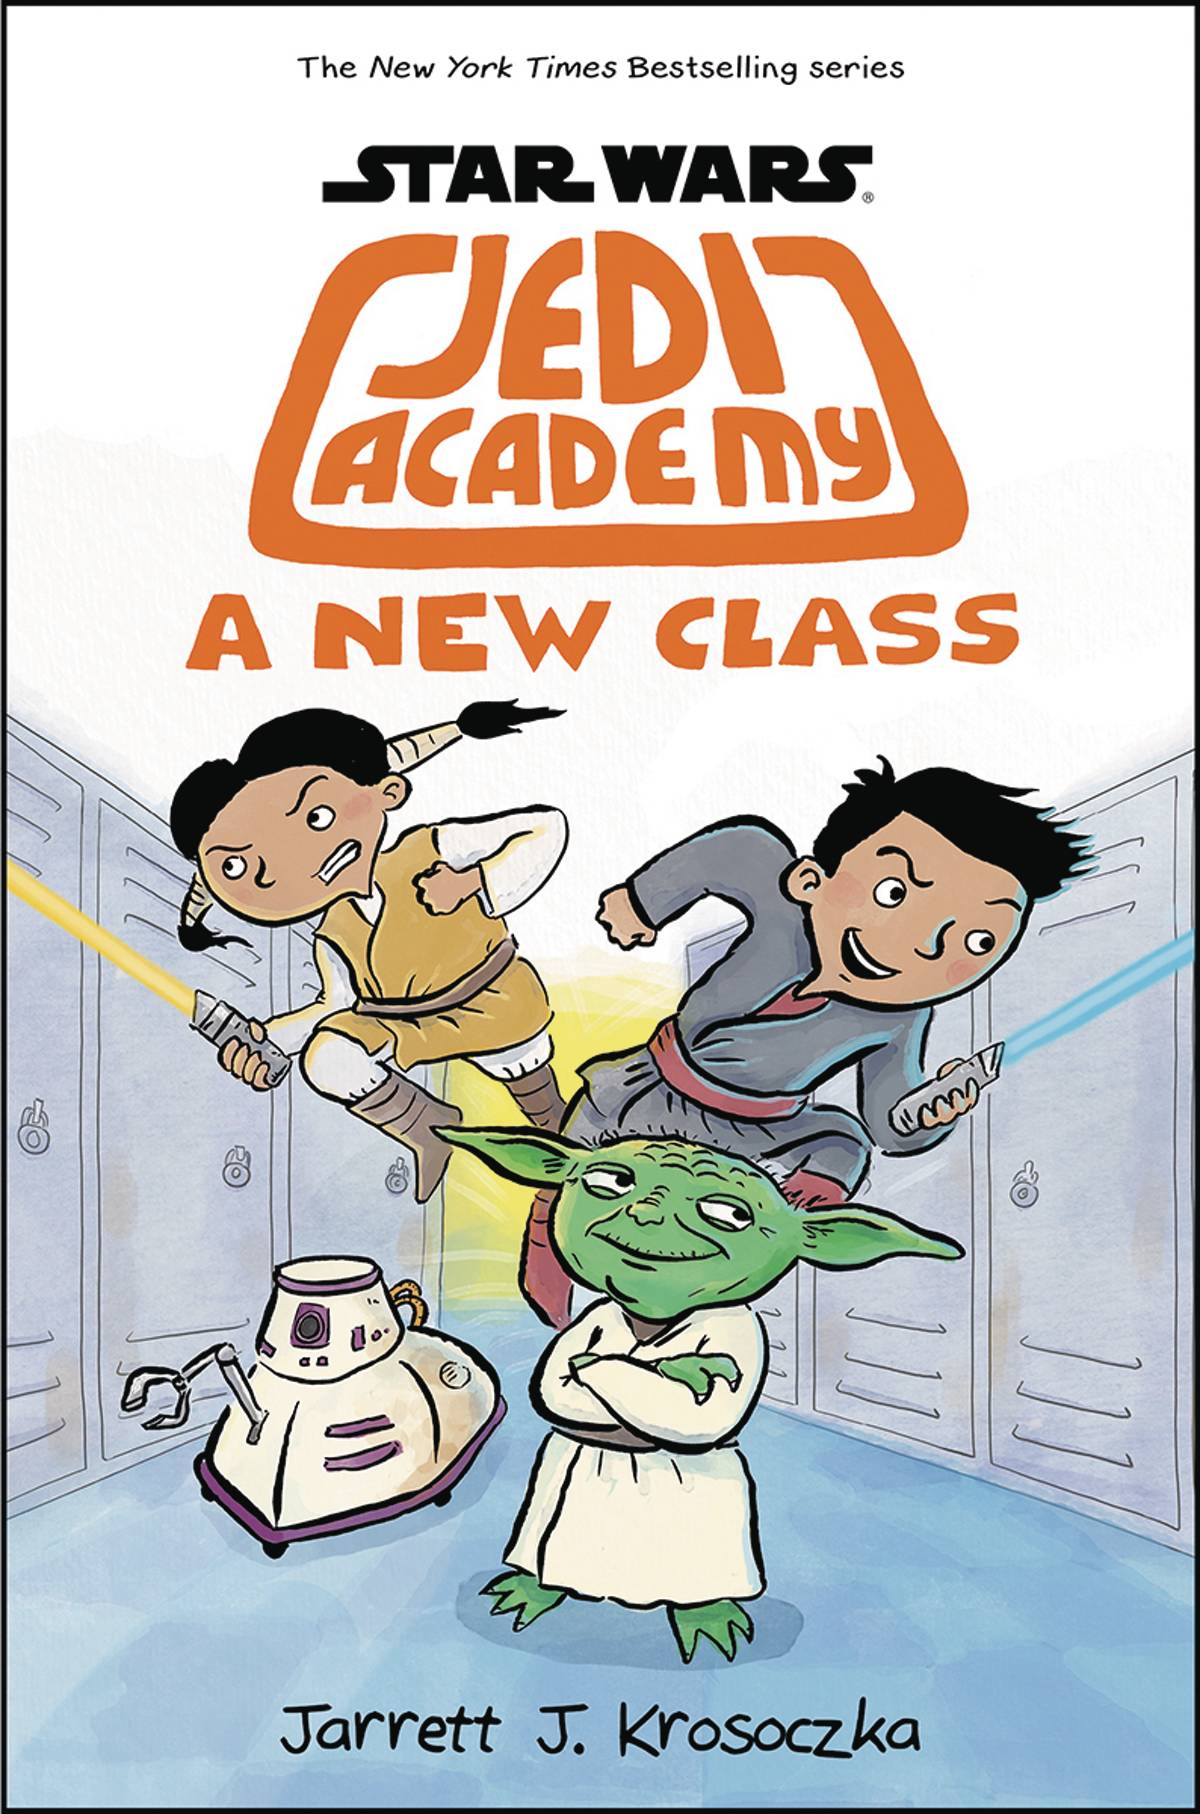 Star Wars Jedi Academy Young Reader Hardcover Volume 4 New Class